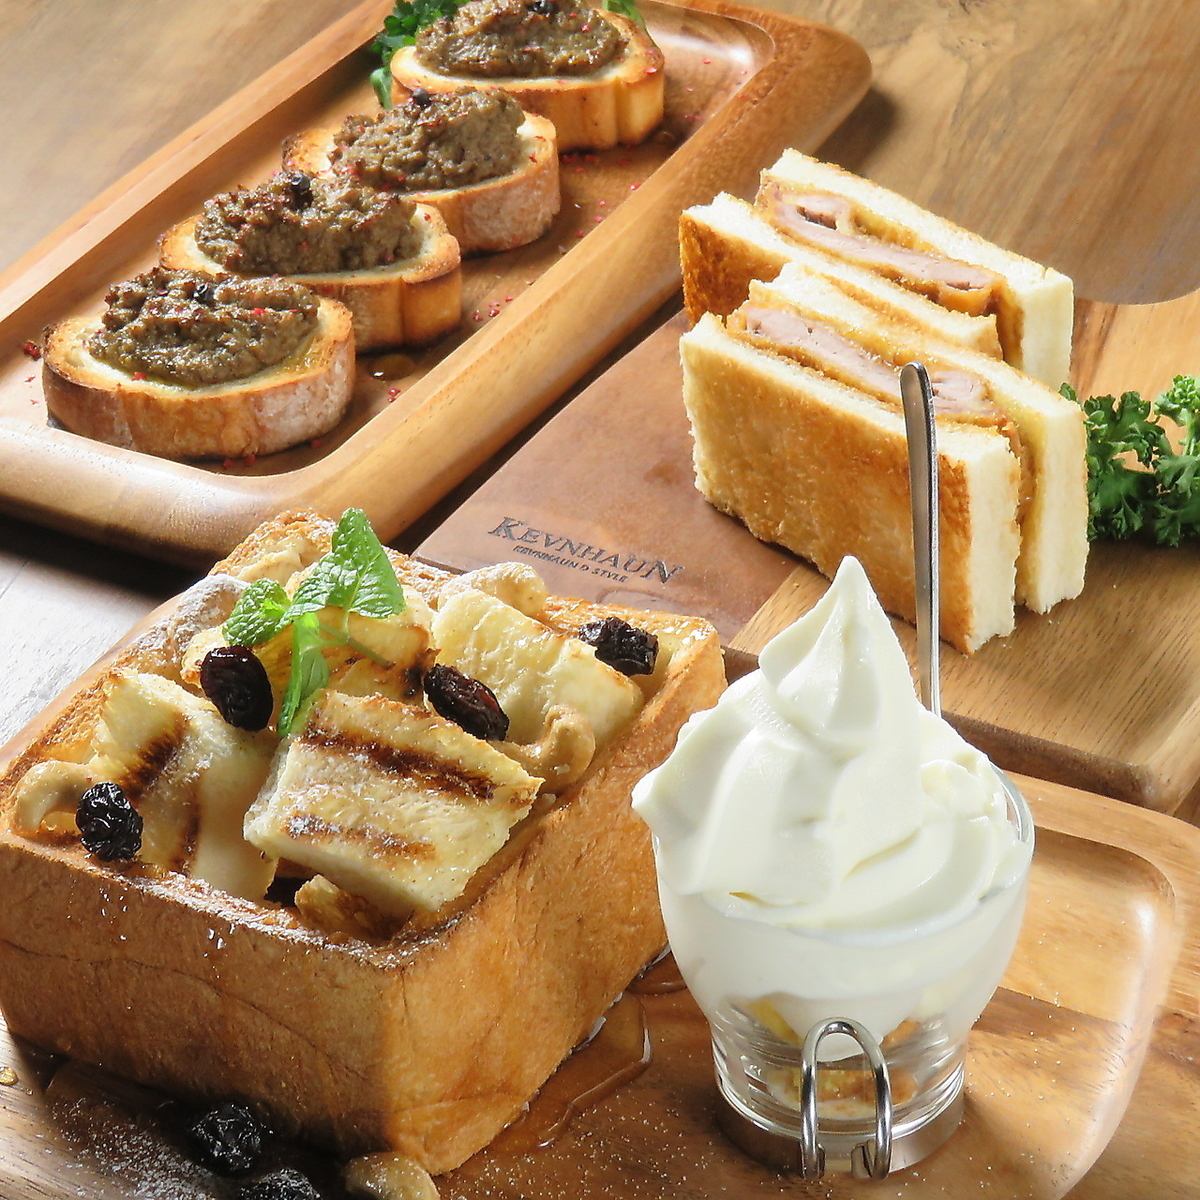 Decoration service for the popular honey toast!